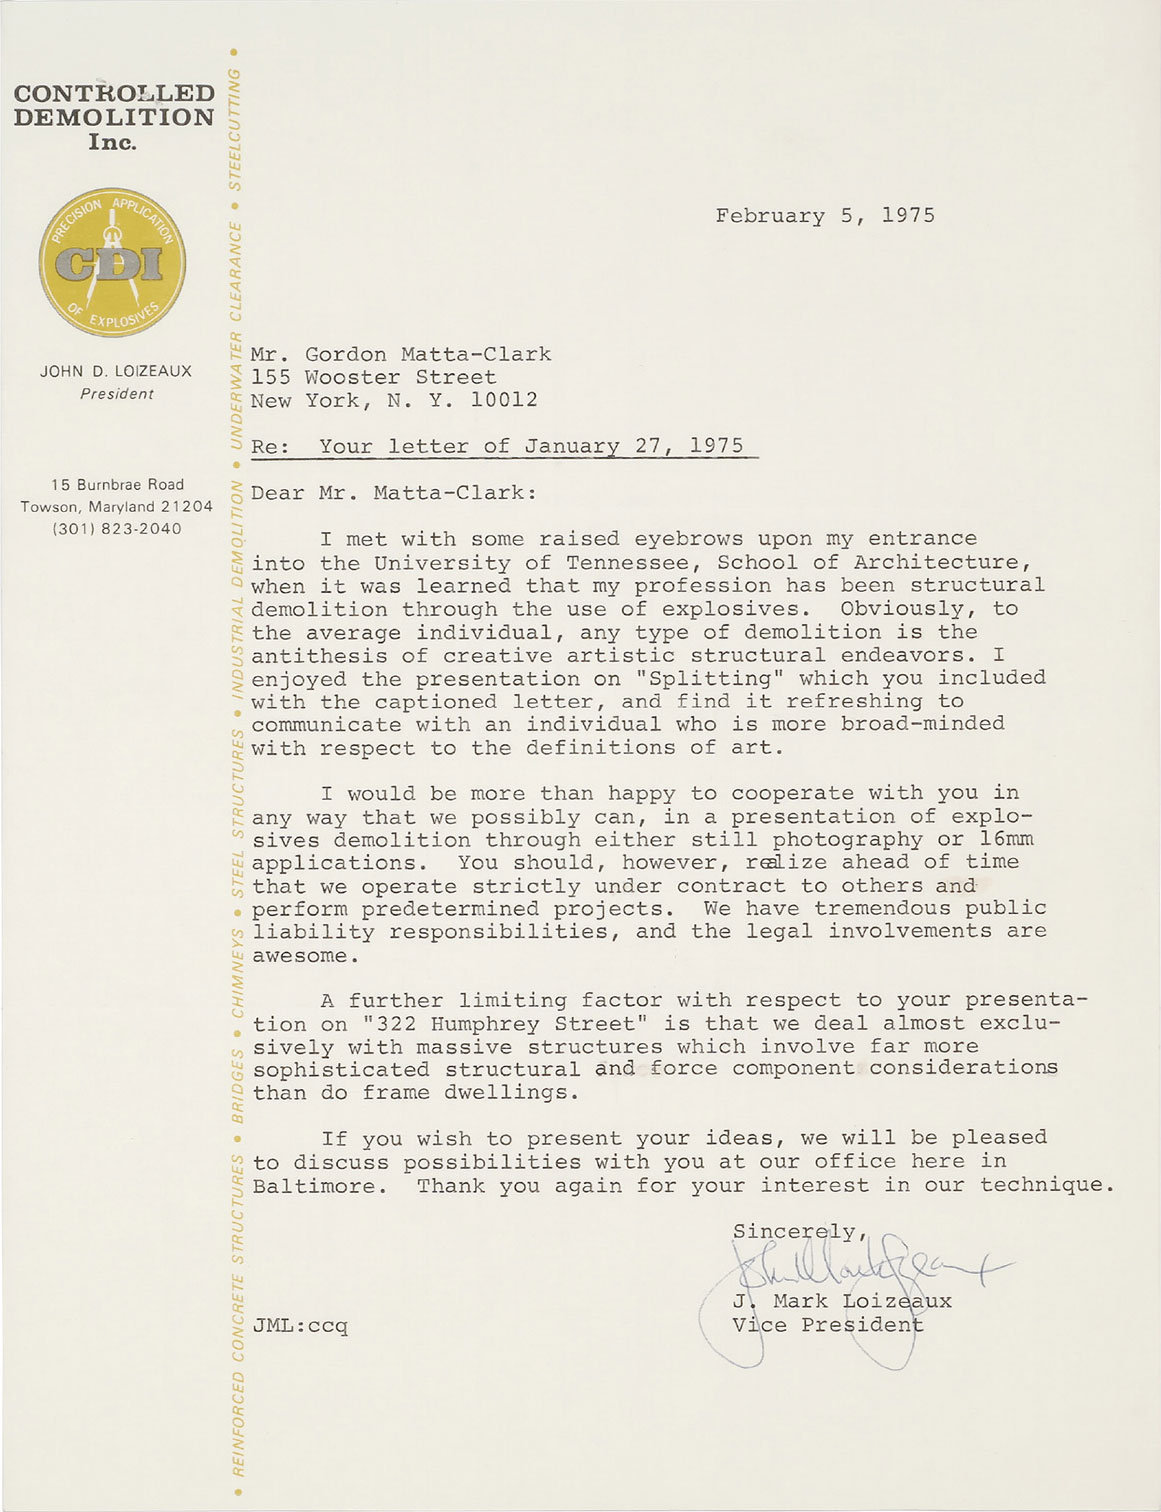 A letter responding to Matta-Clark written by Mrs. Loizeaux’s son, J. Mark Loizeaux, the firm’s current president. He expresses his gratitude for the artist’s enthusiasm for demolition, agrees to collaborate in the future, and reminds Matta-Clark of the legal liabilities of his work.